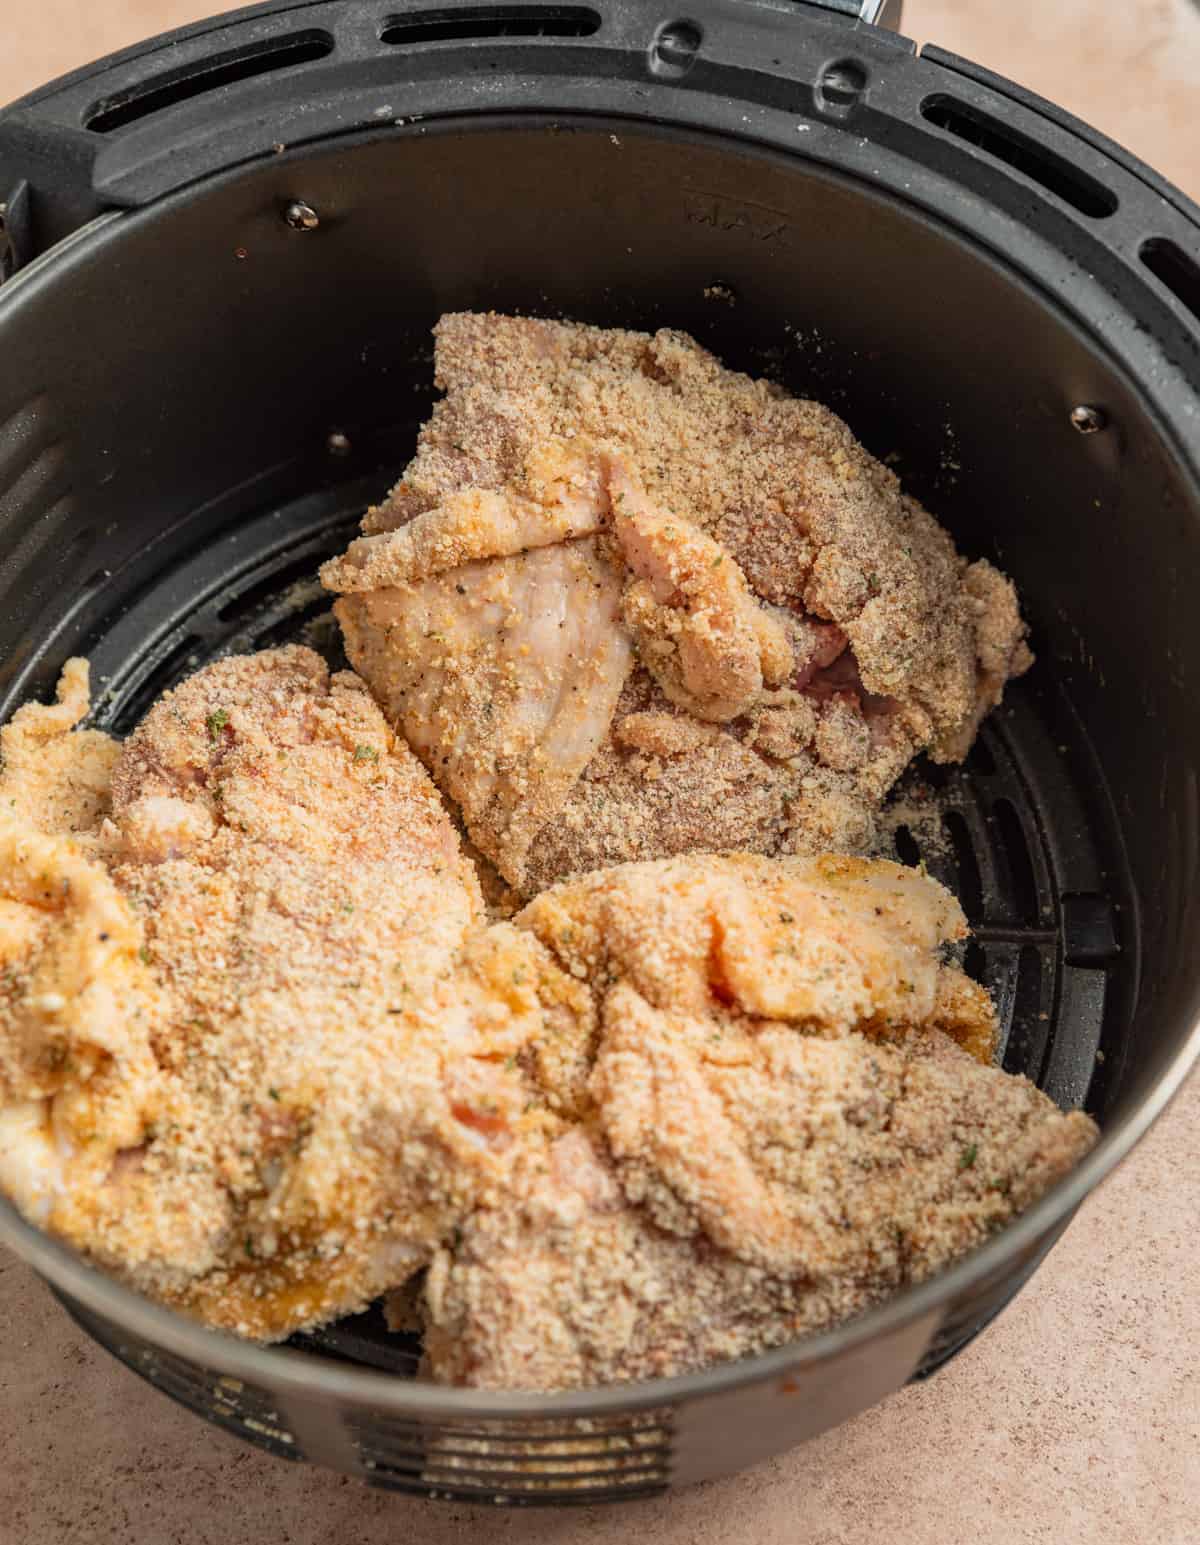 Air fryer basket with breaded chicken thighs.